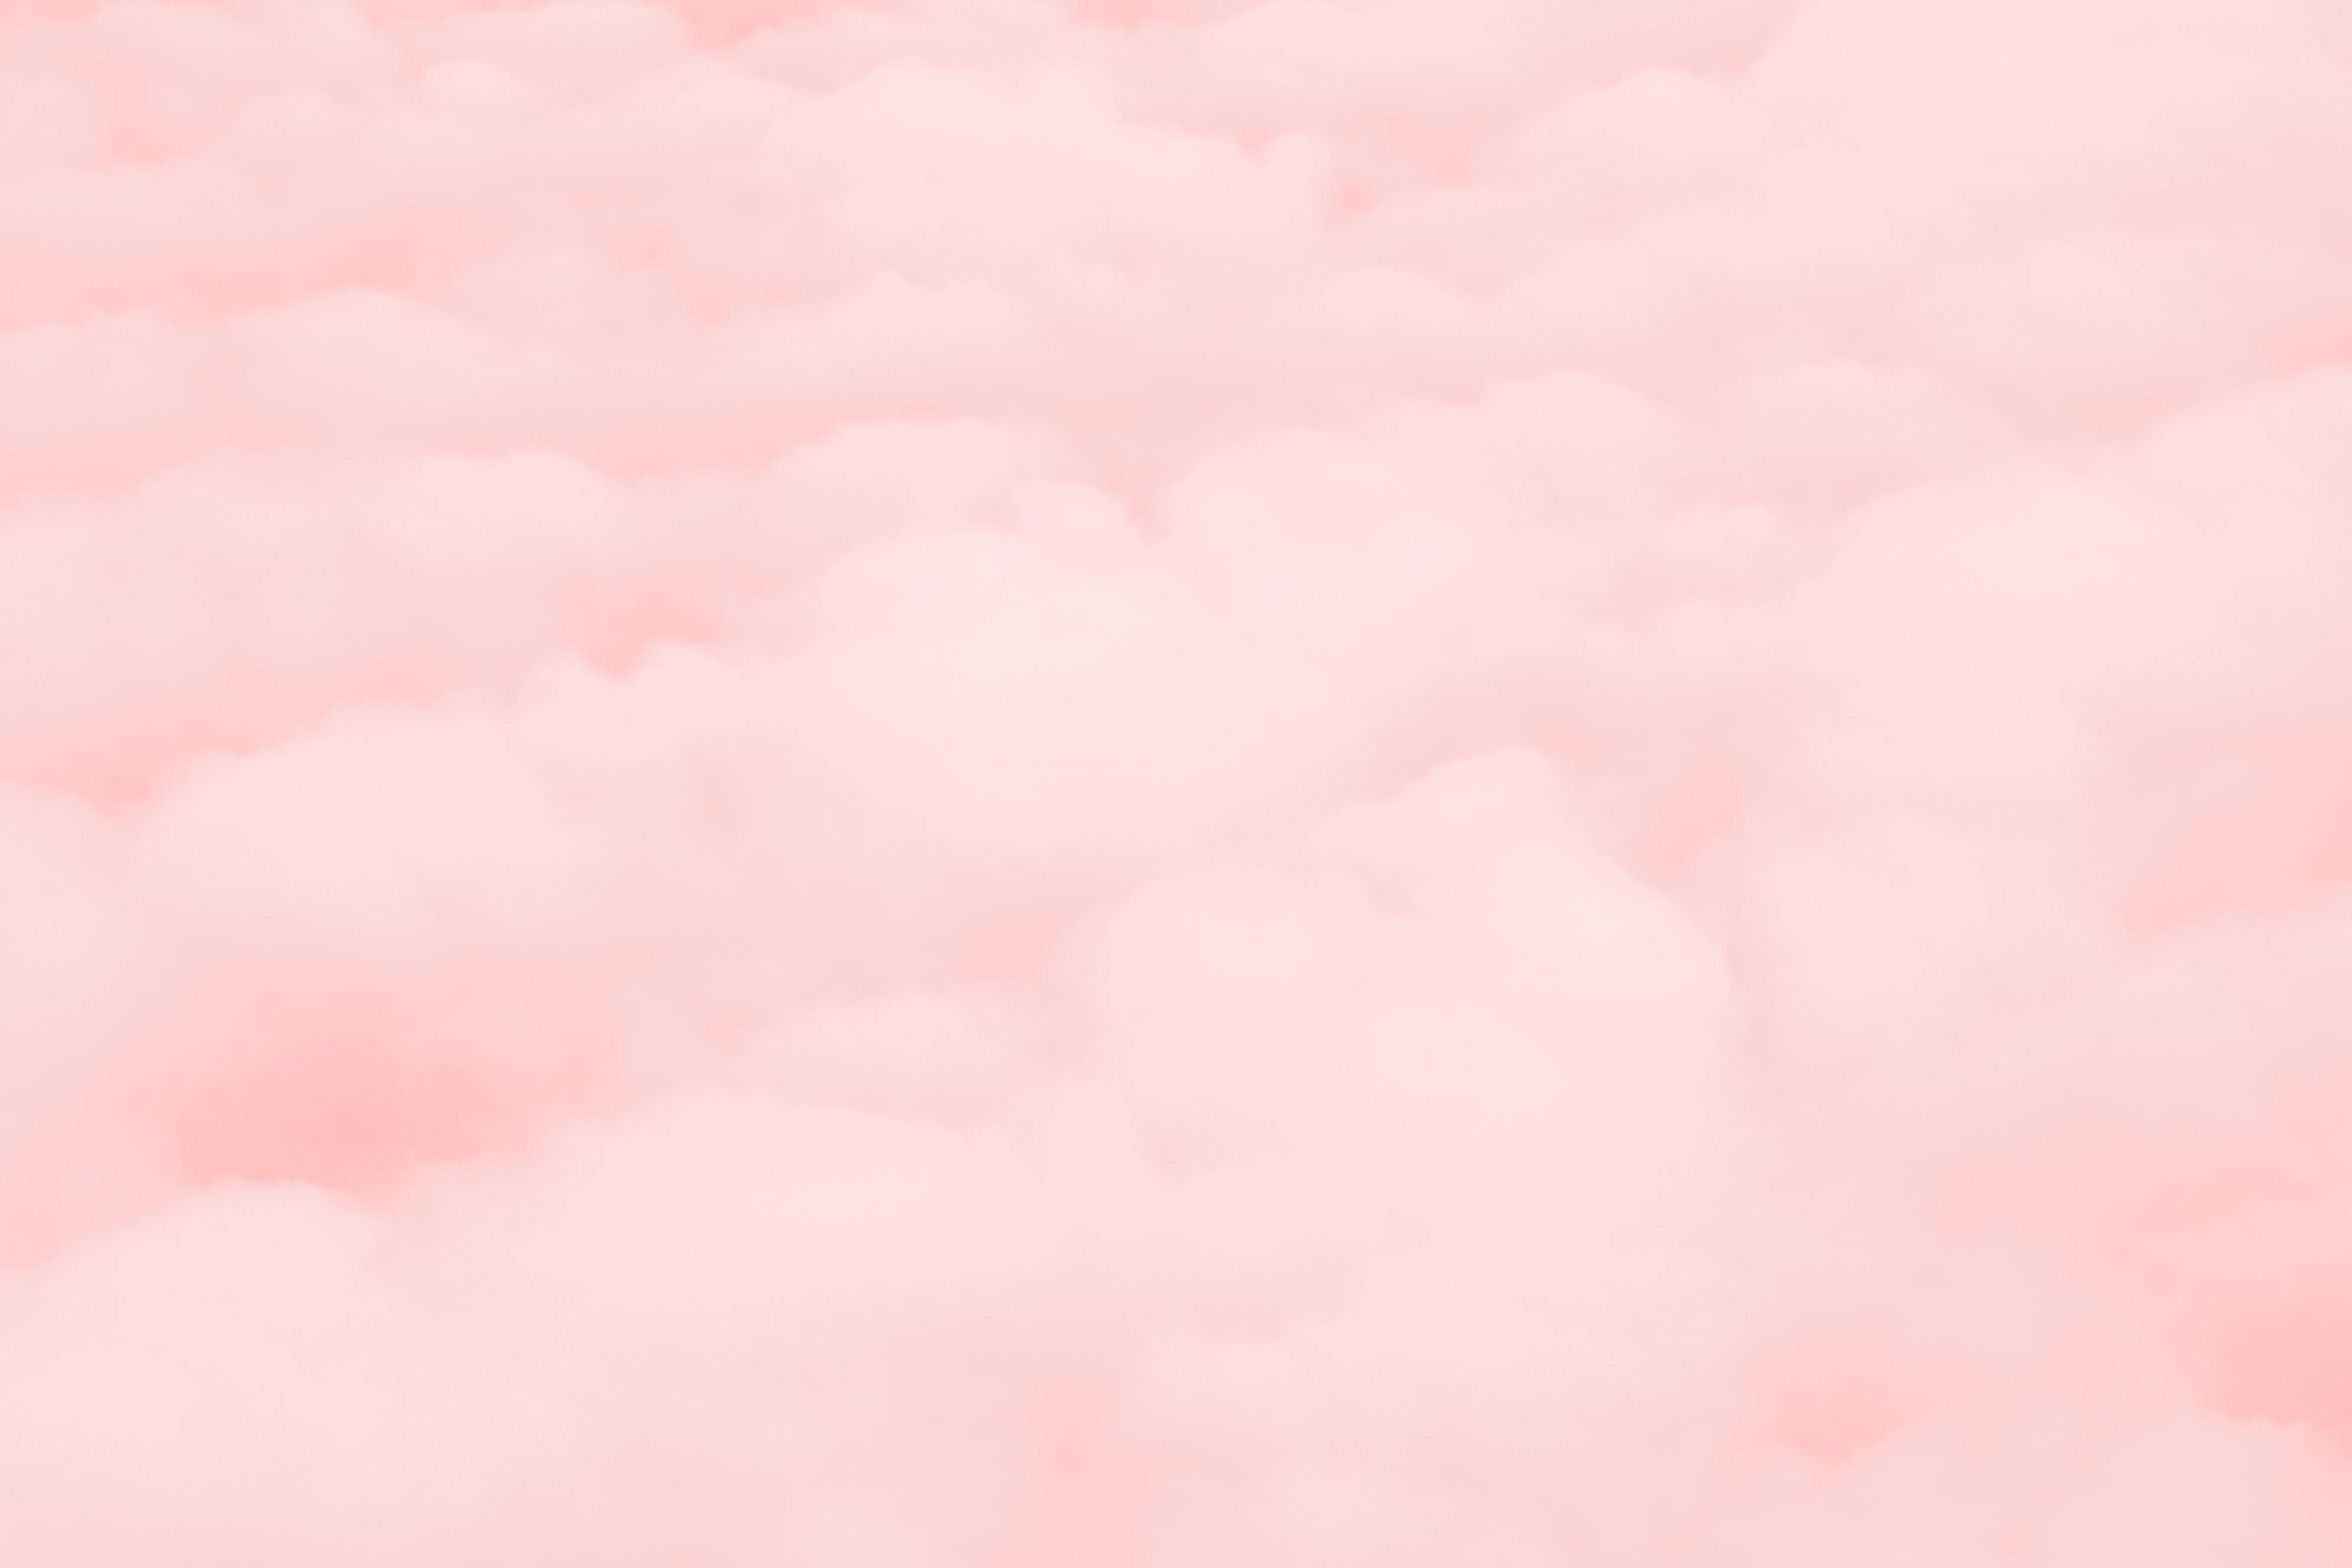 Pink Desktop Top View: Over 23,620 Royalty-Free Licensable Stock Photos